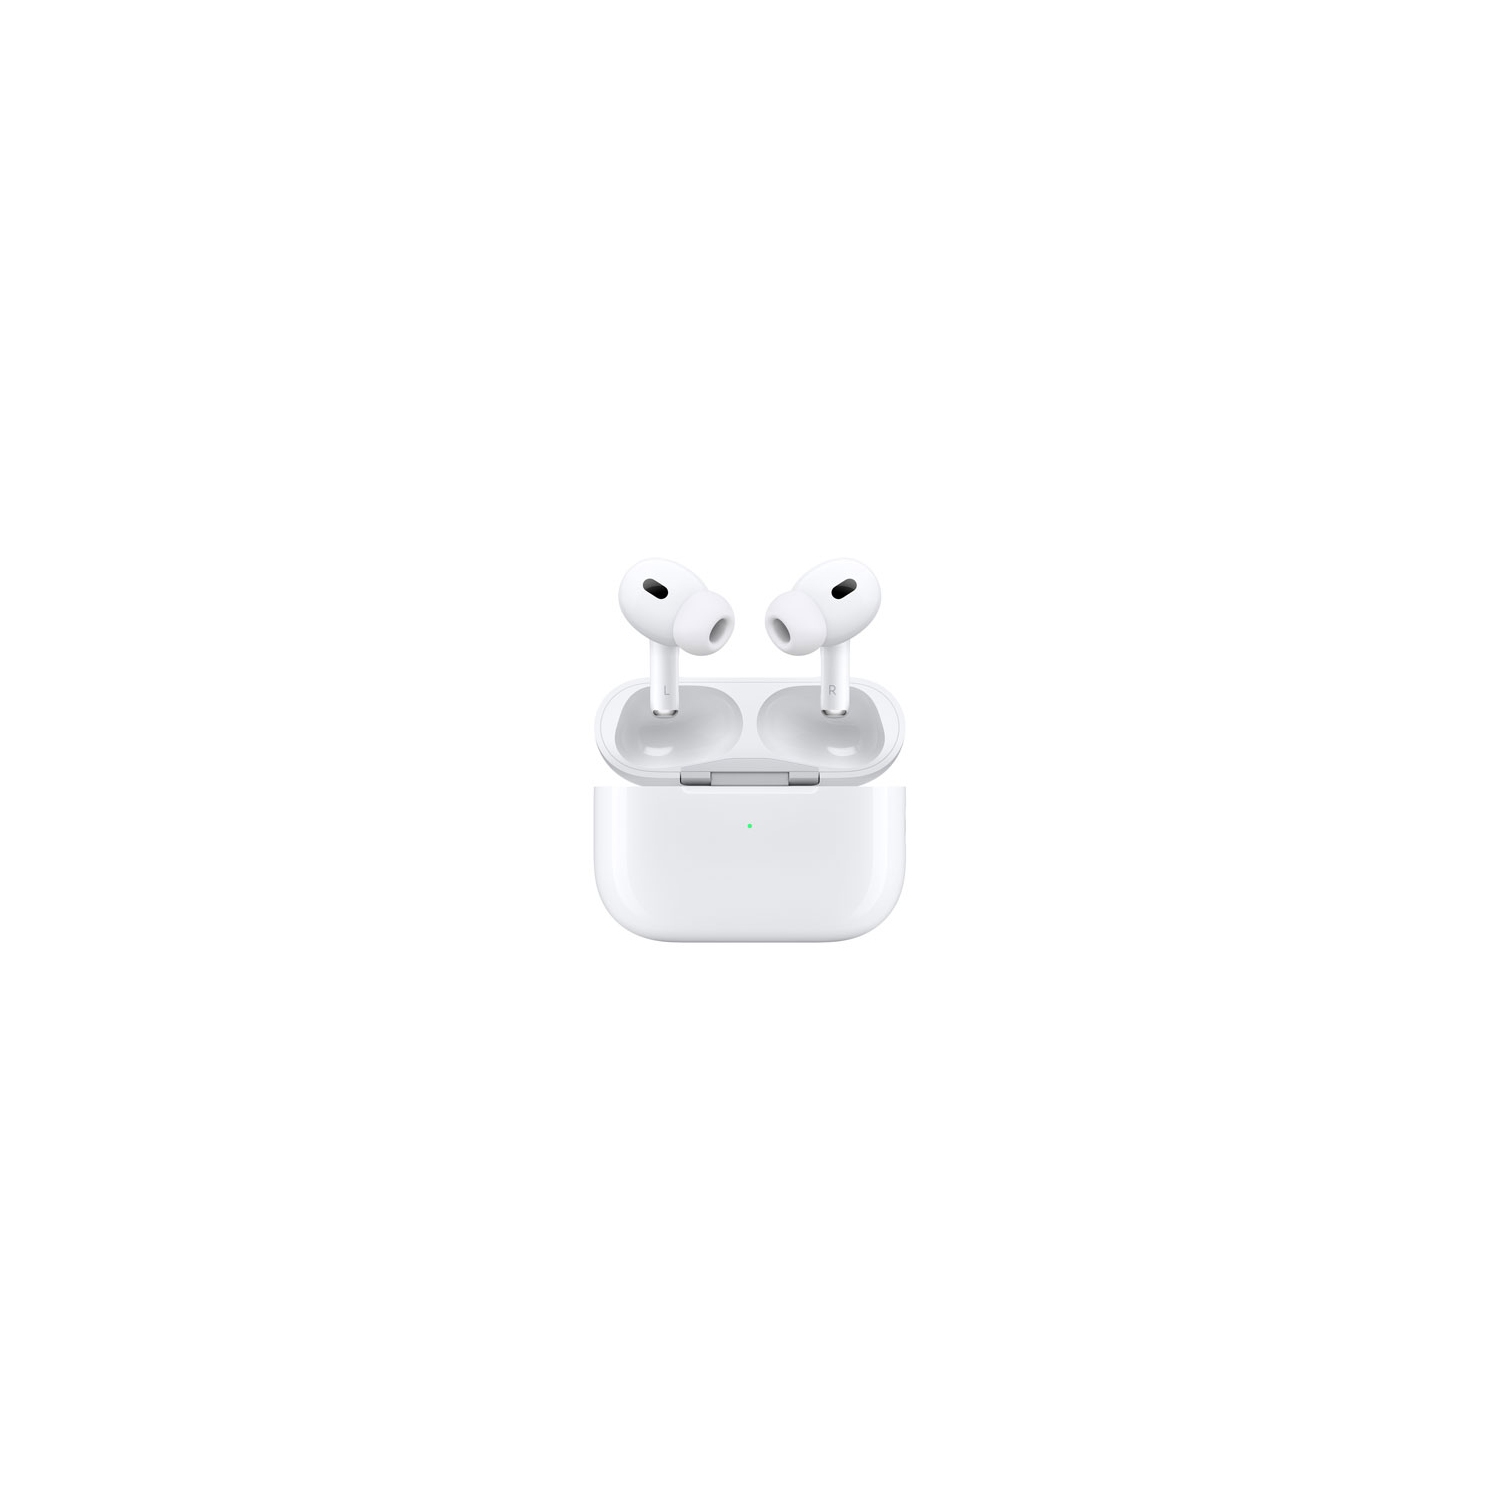 Open Box - Apple AirPods Pro (2nd generation) Noise Cancelling True Wireless Earbuds with USB-C MagSafe Charging Case